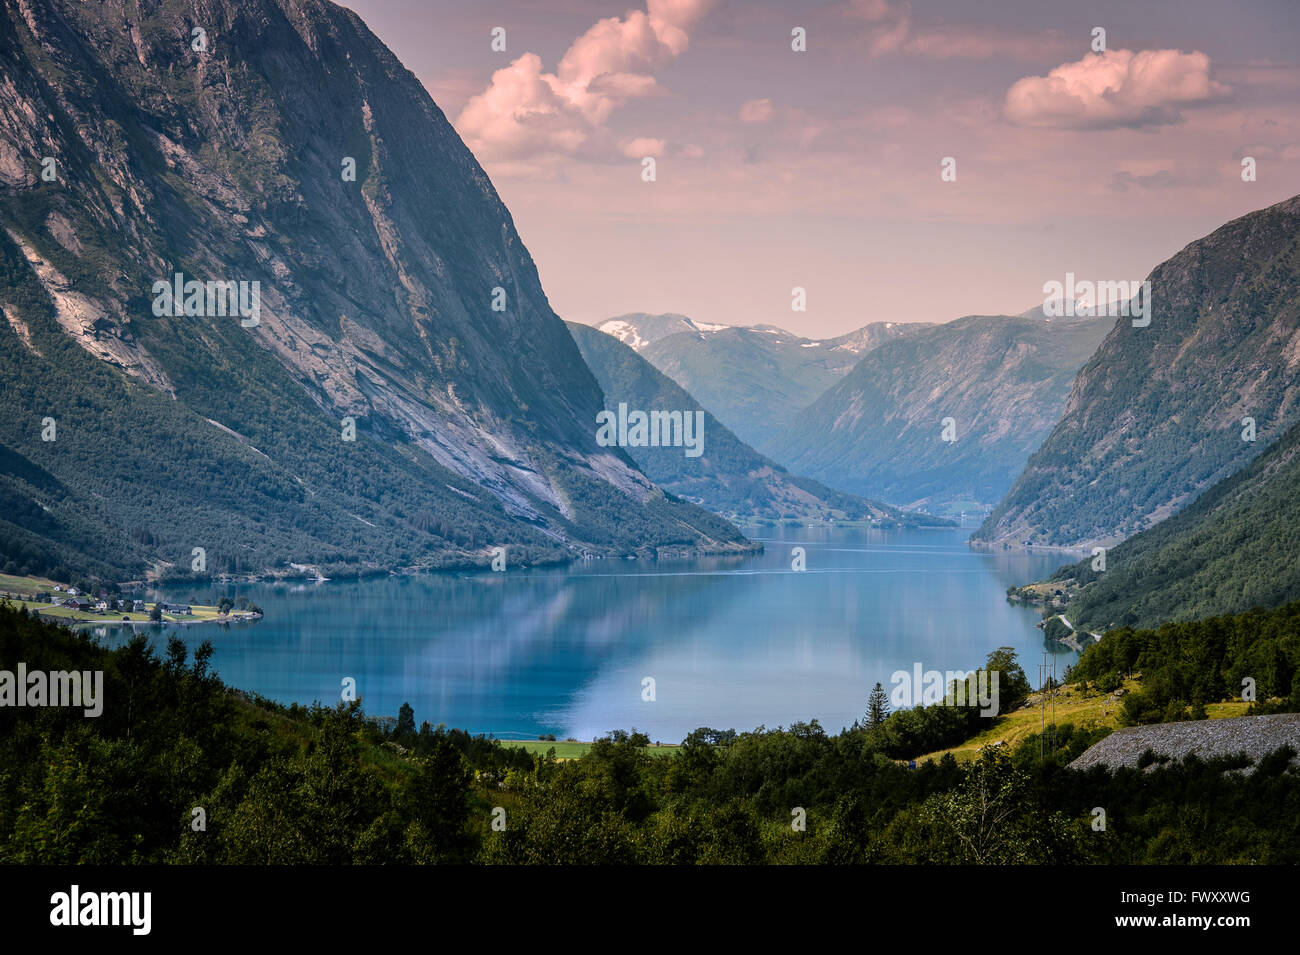 Norway, Sogn og Fjordane, Sogndalsfjora, Scenic view of lake in mountains Stock Photo